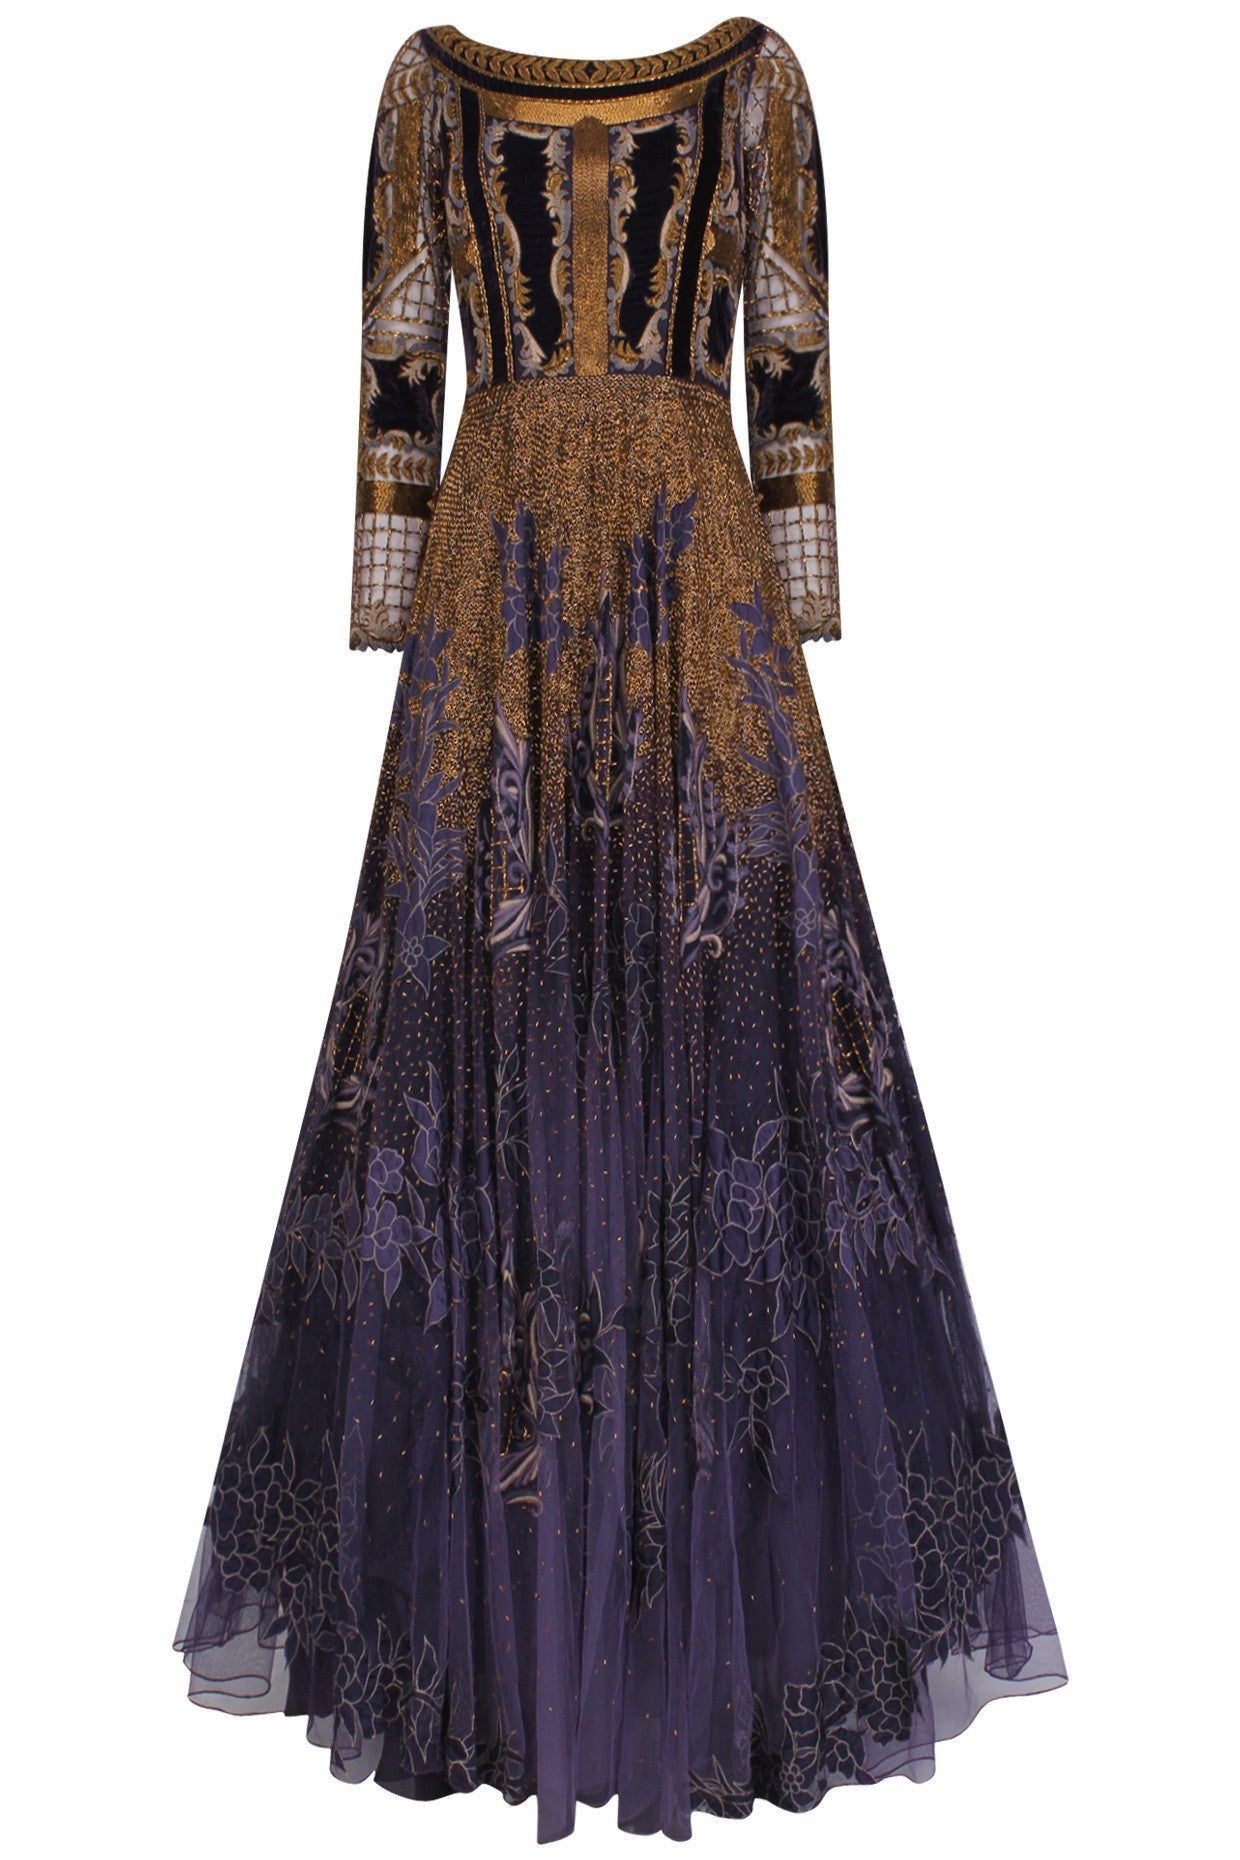 Voilet color Indo Western Gown with Antique Embroidery